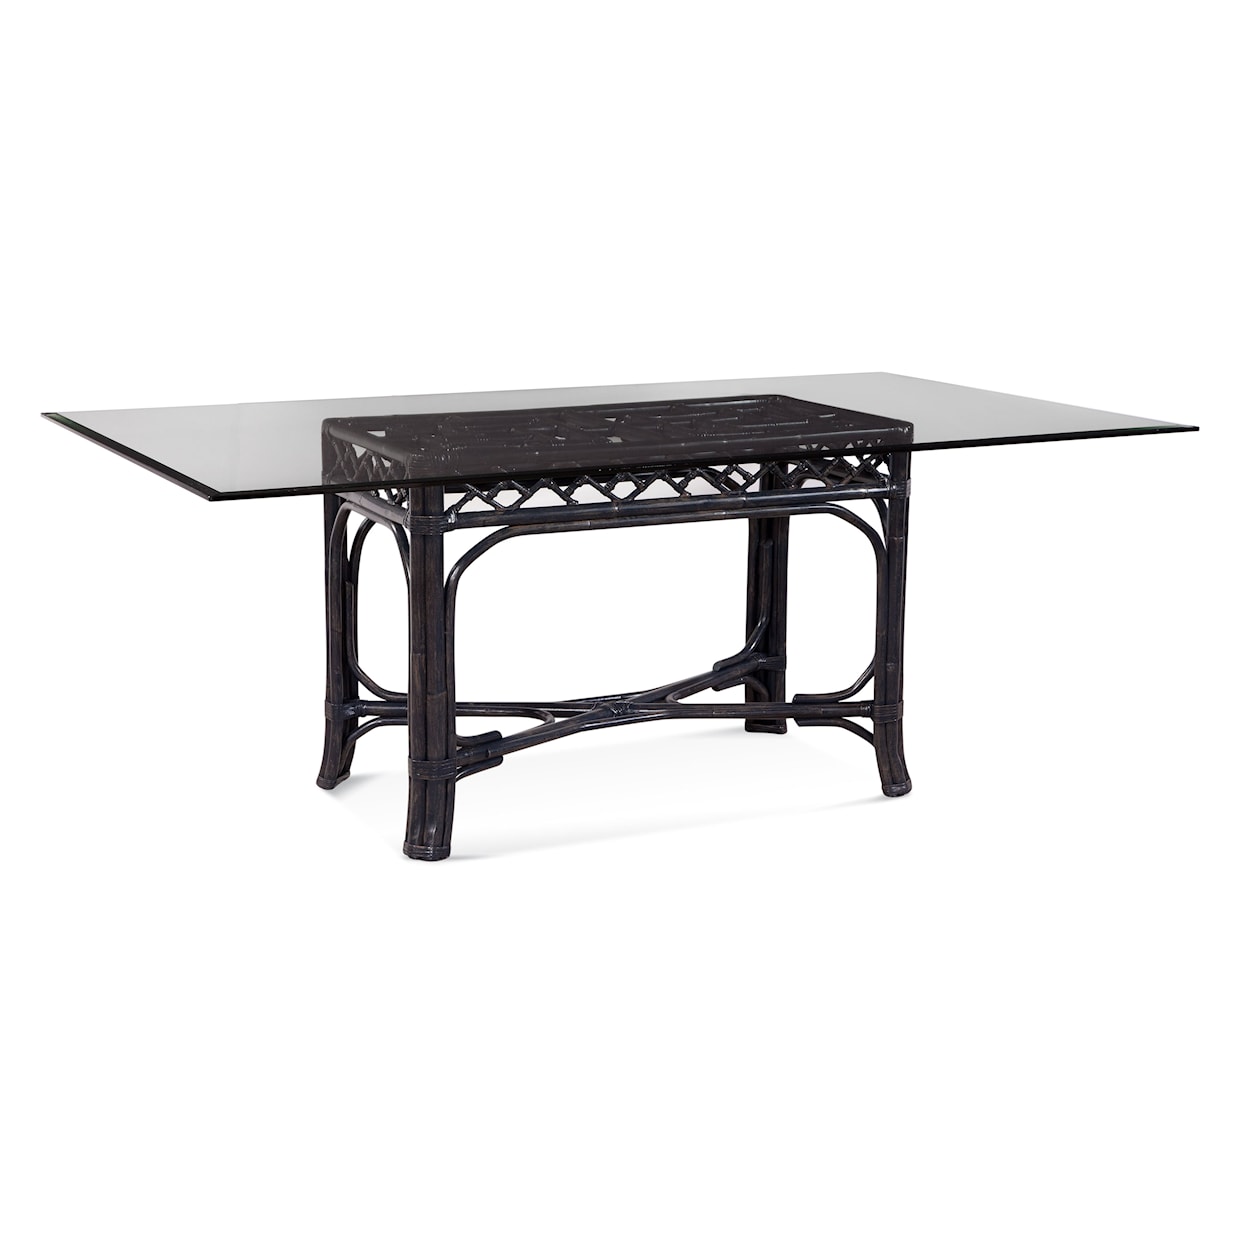 Braxton Culler Chippendale Rectangular Dining Table